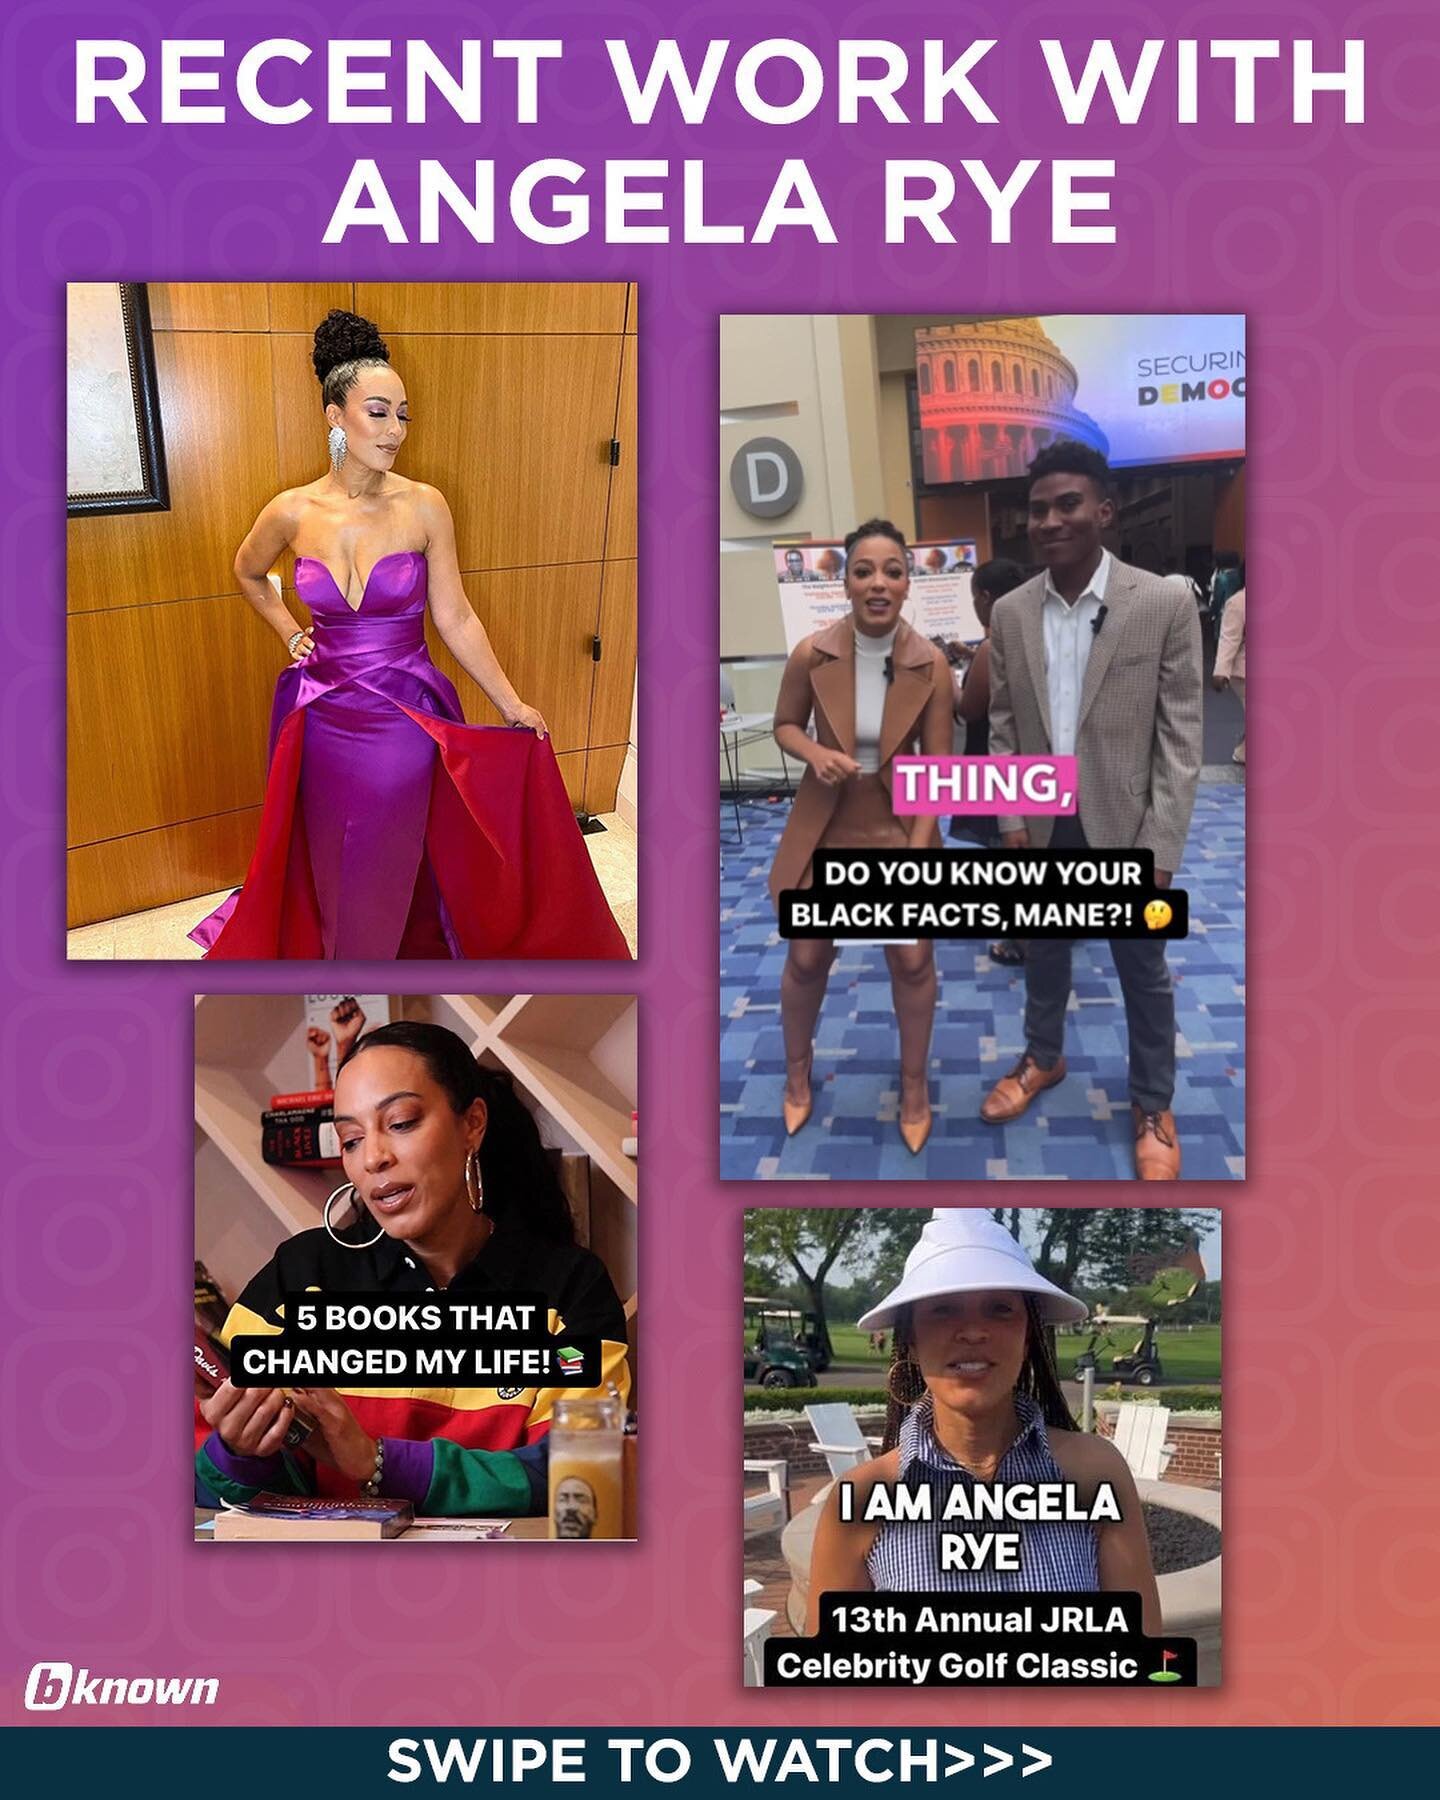 We have been fortunate to work with the great @angelarye, and recently we joined her at the Congressional Black Caucus Annual Legislative Conference. See some special moments captured that resonated well with her audience, and helped lead to a recent